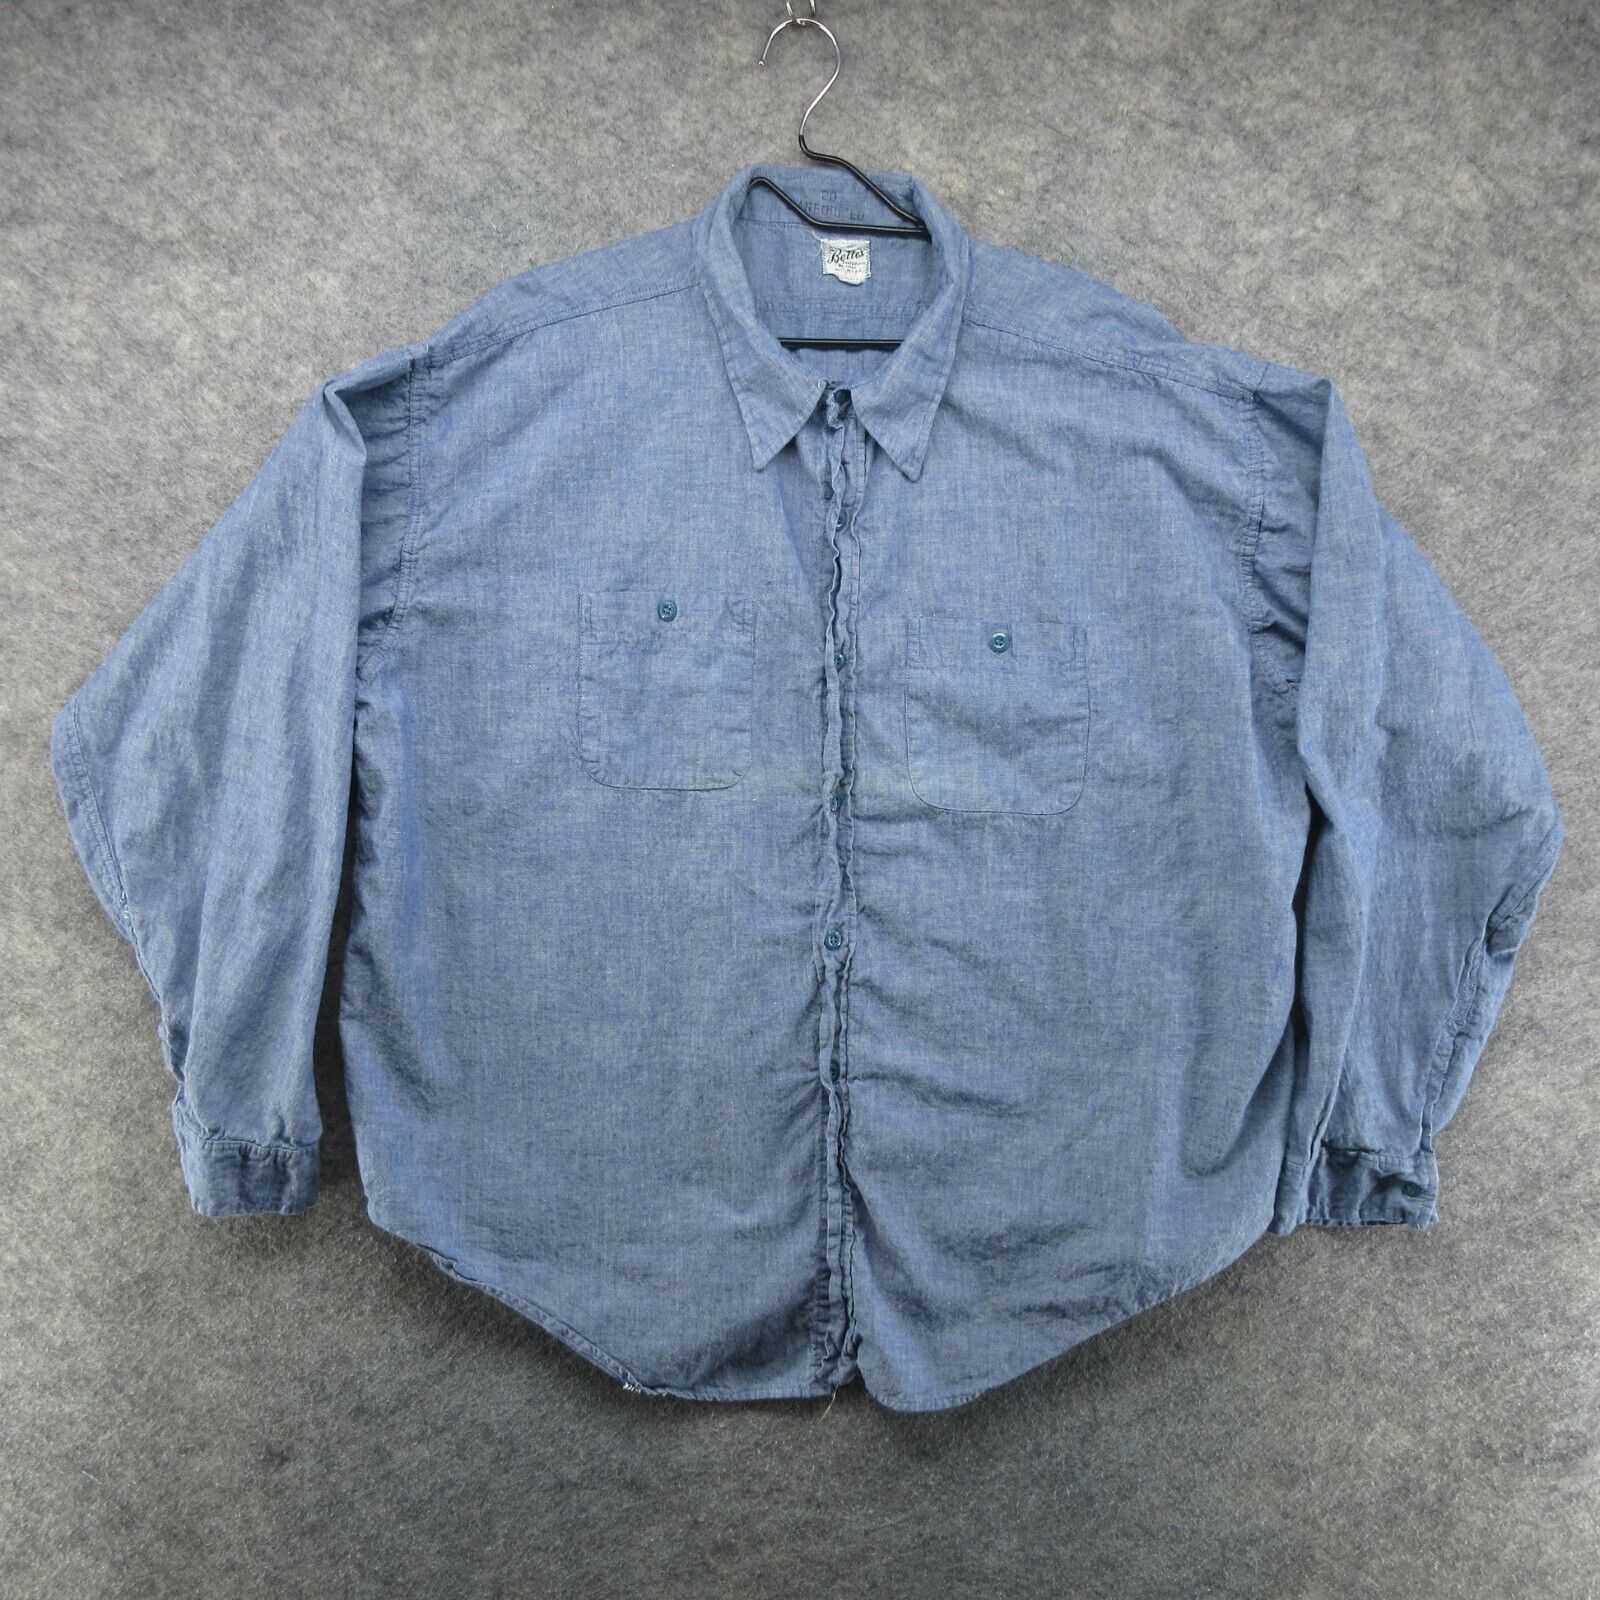 VTG Beltex Shirt Mens 3XL Blue Sanforized Chambray Button Up Made in USA 50s 60s